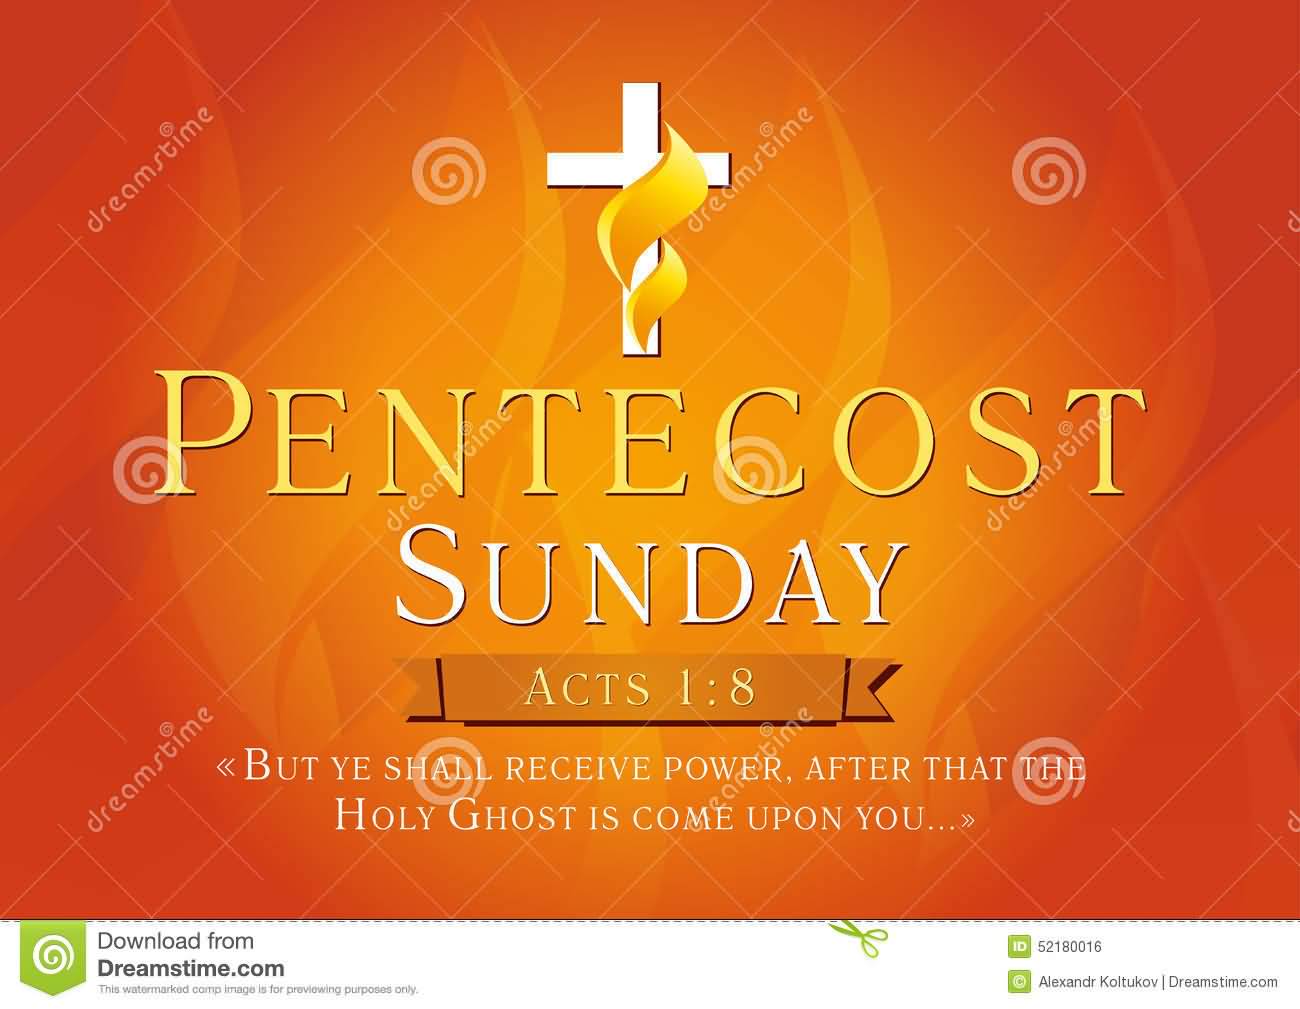 Pentecost Sunday But Ye Shall Receive Power After That The Holy Ghost Is Come Upon You